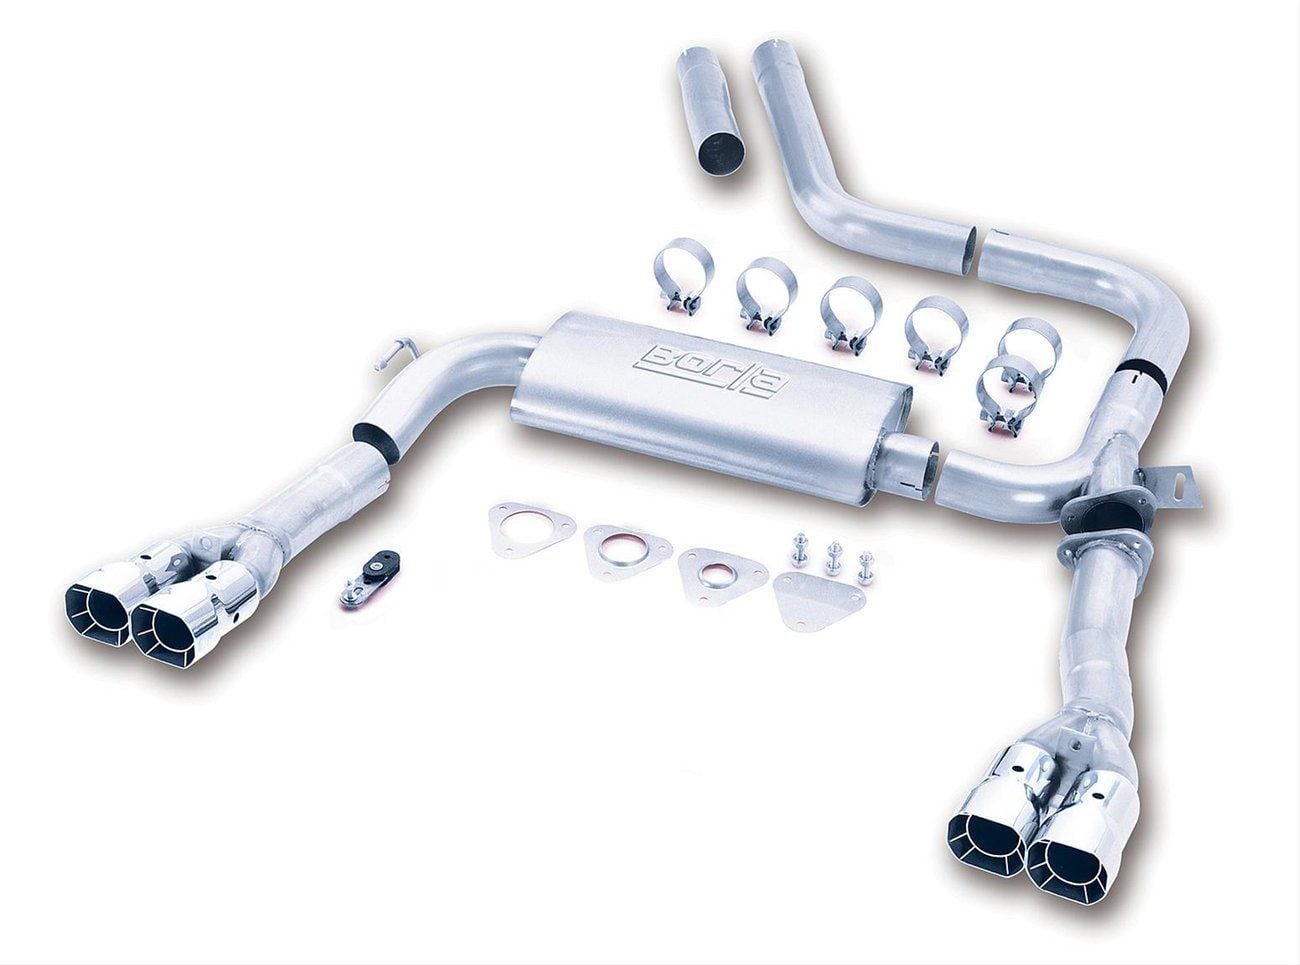  - NEW 98-02 F BODY Borla Cat-Back Exhaust System (Adjustable) - Fort Worth, TX 76134, United States